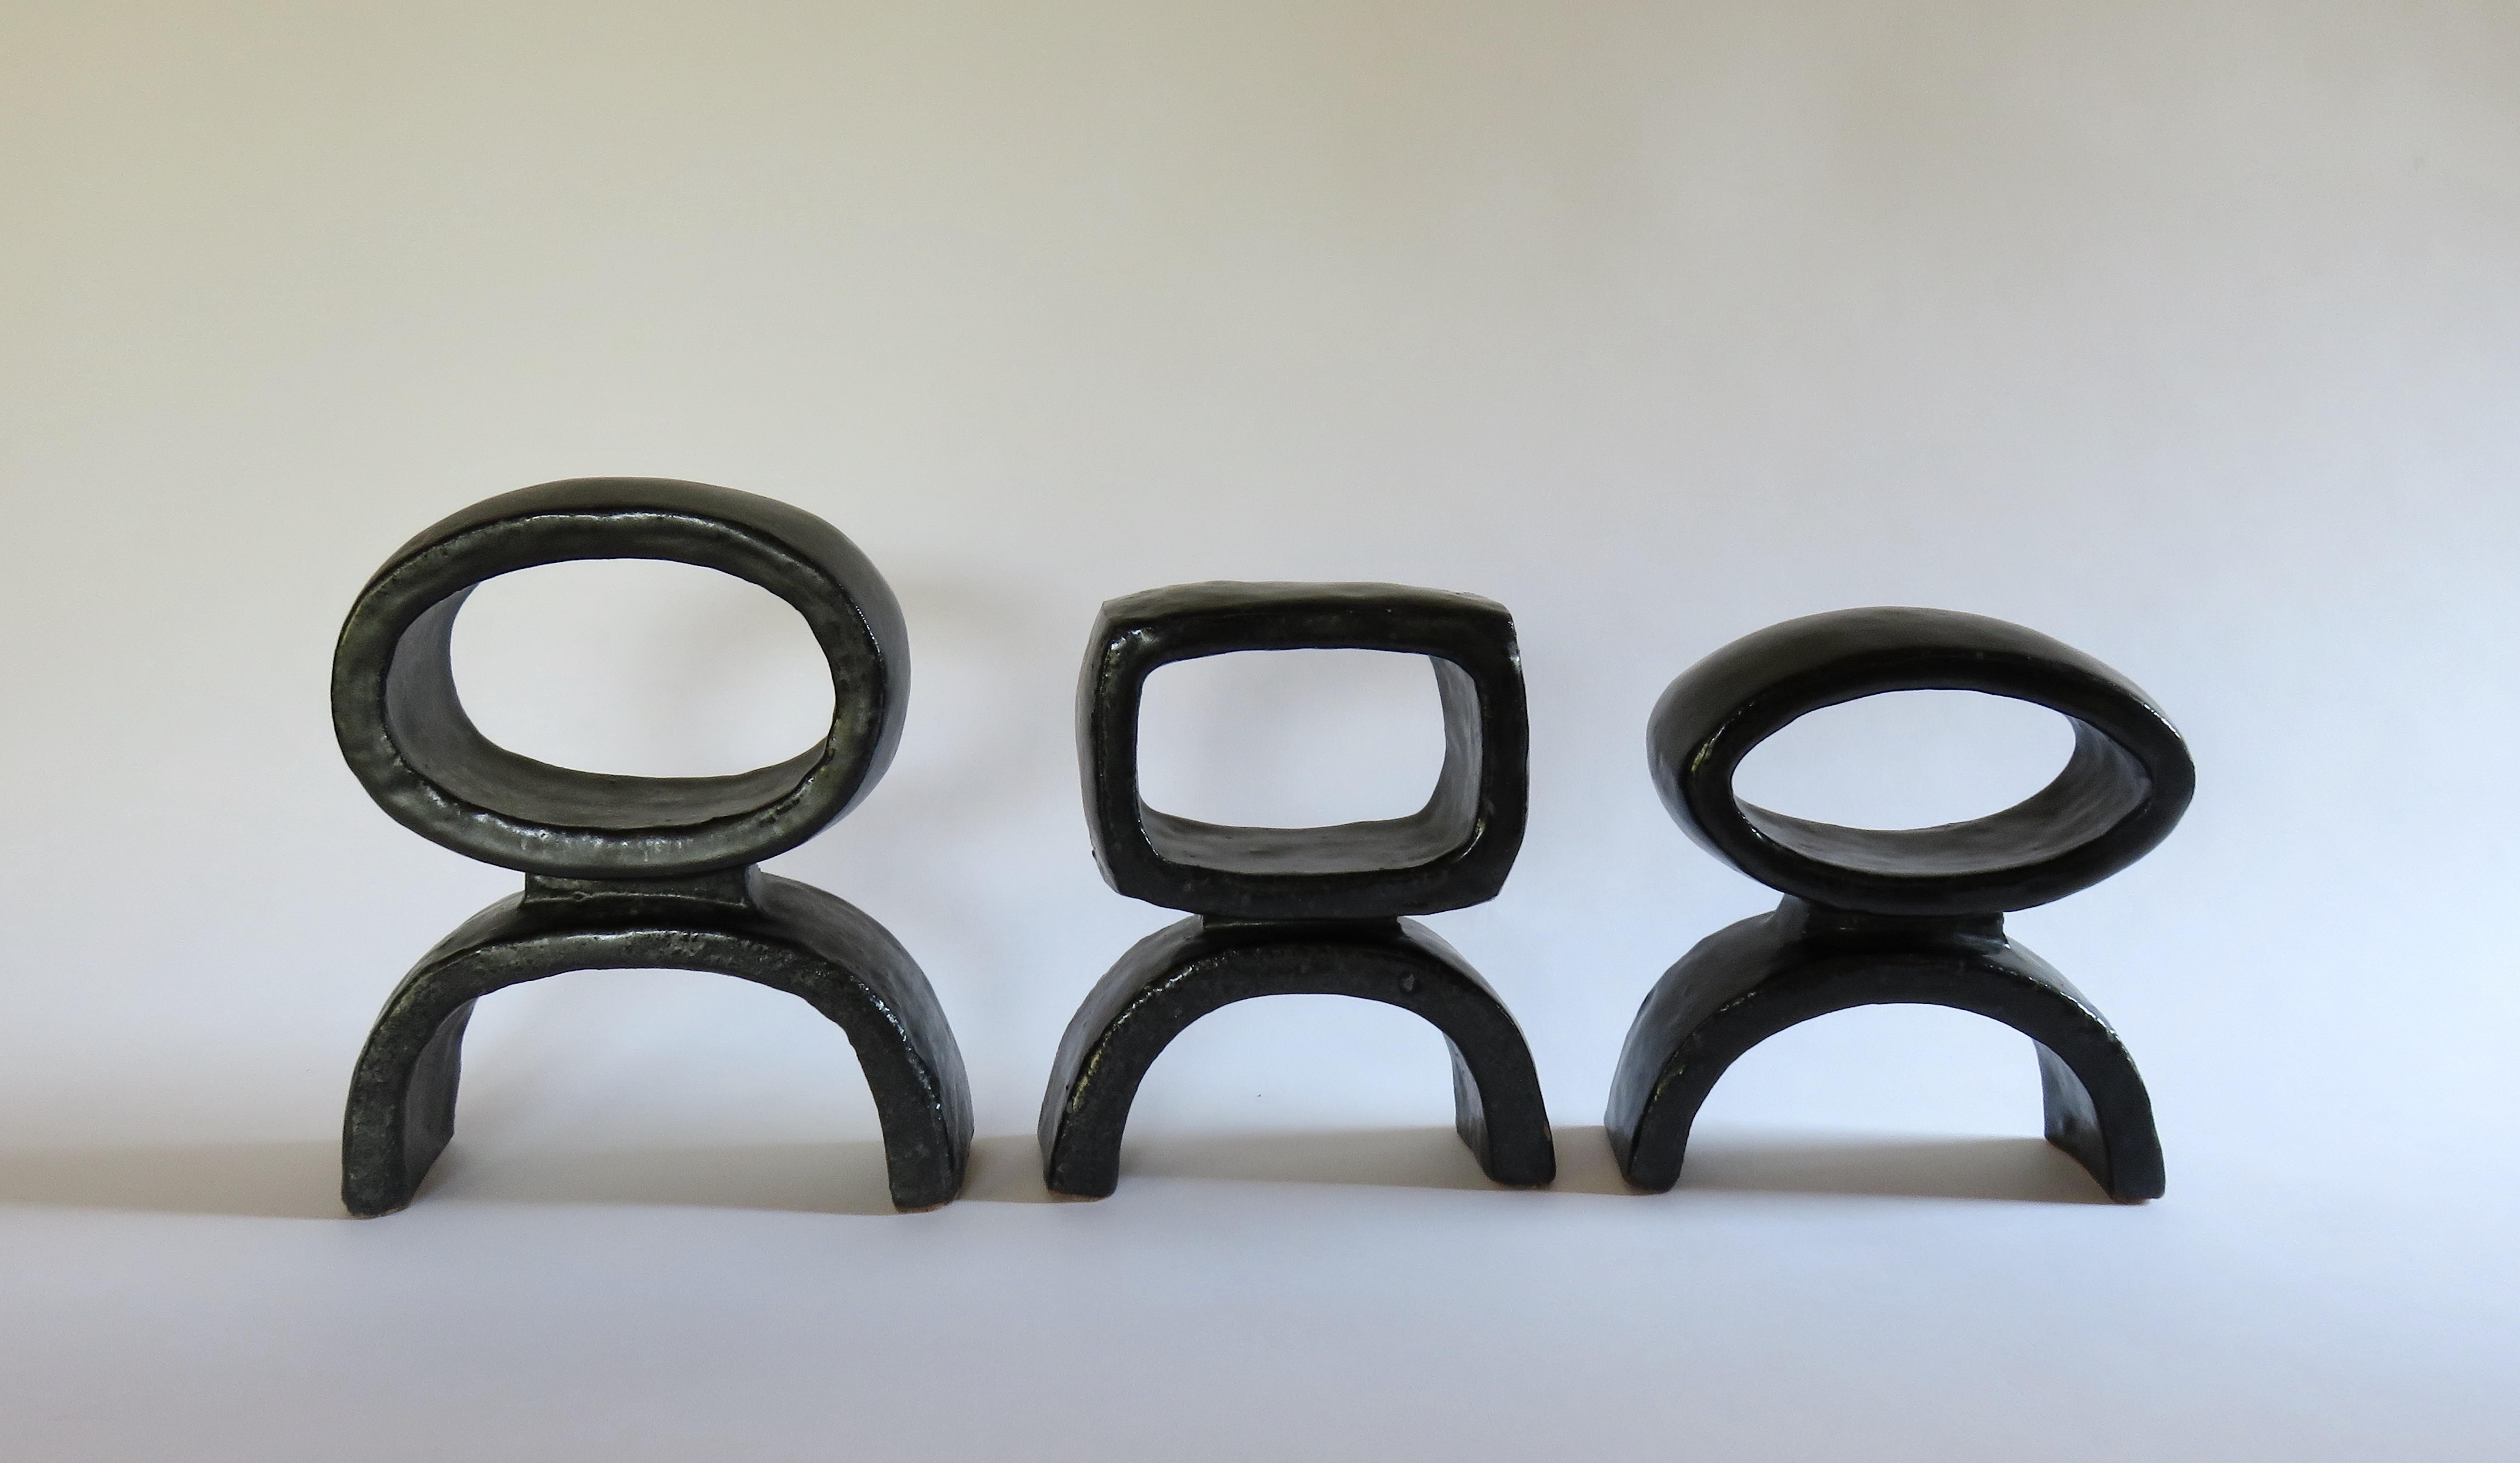 A trio of 3 hand built ceramic  Modern TOTEMs from a series investigating the Totemic form. Each one is different, a soft rectangle, an oval and a circular ring on arcing legs. The satin black glaze on high-fire stoneware shows the variations,